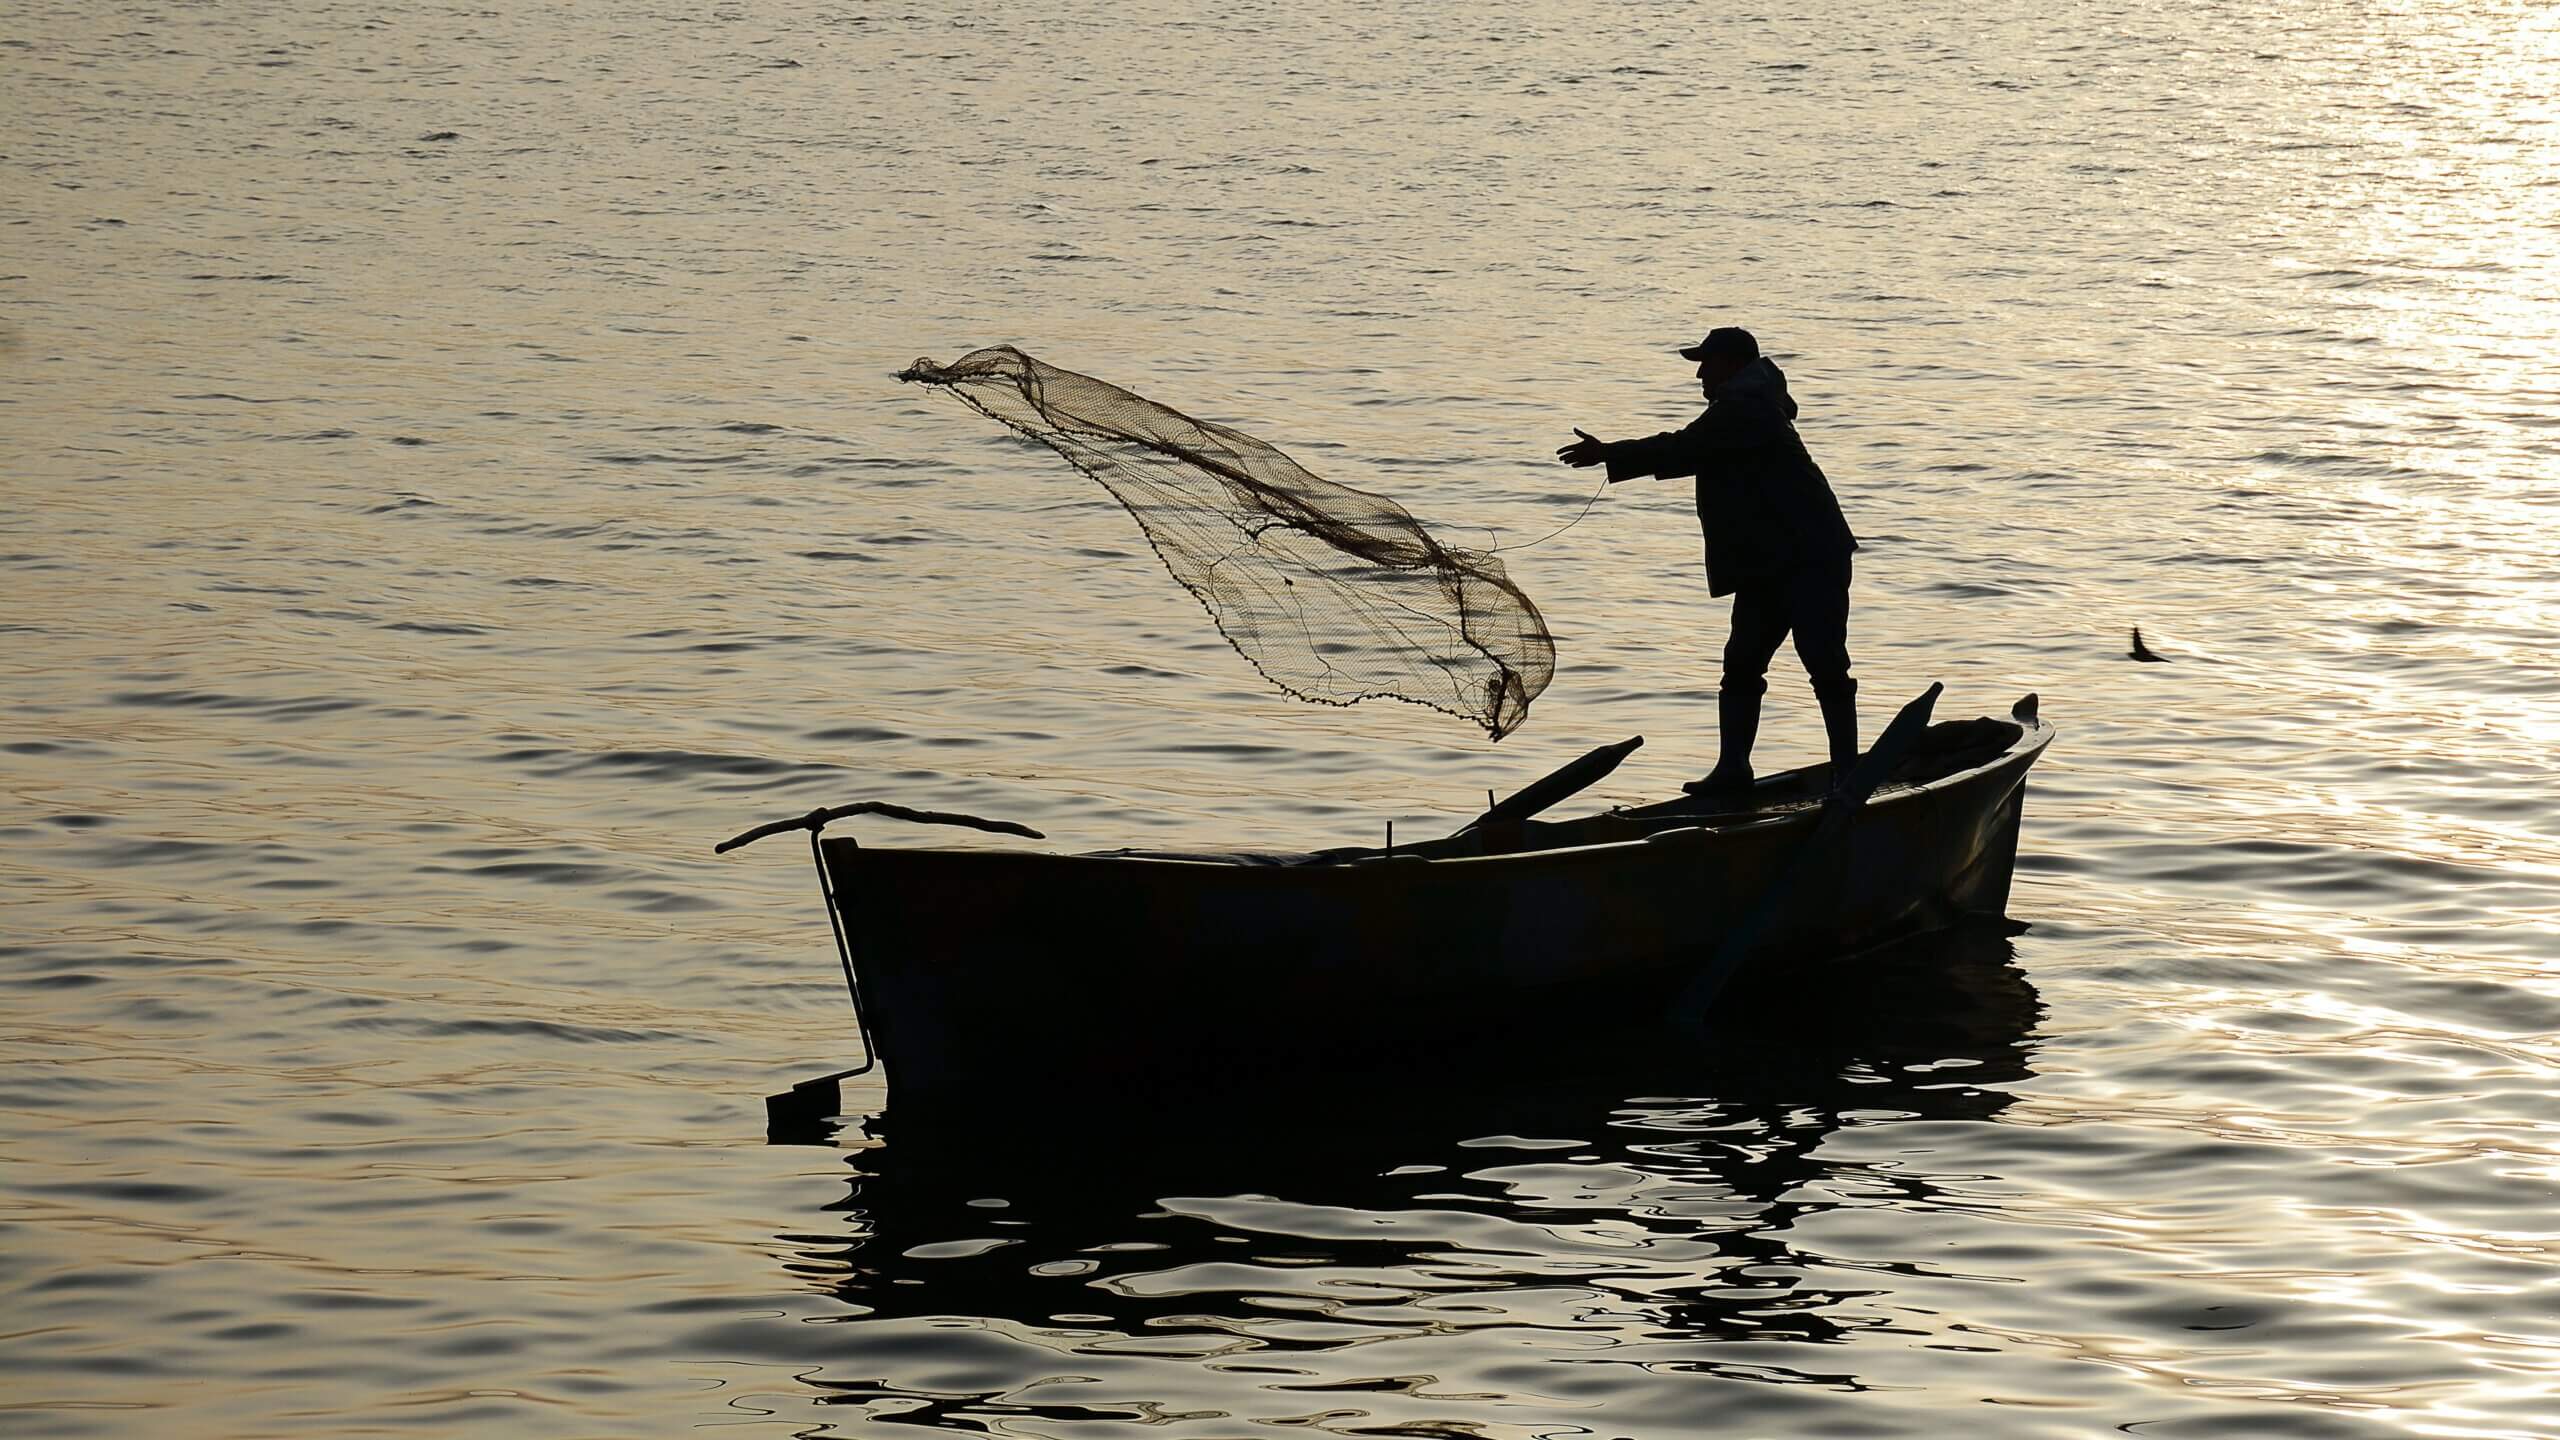 man throwing a net into the water off of a boat